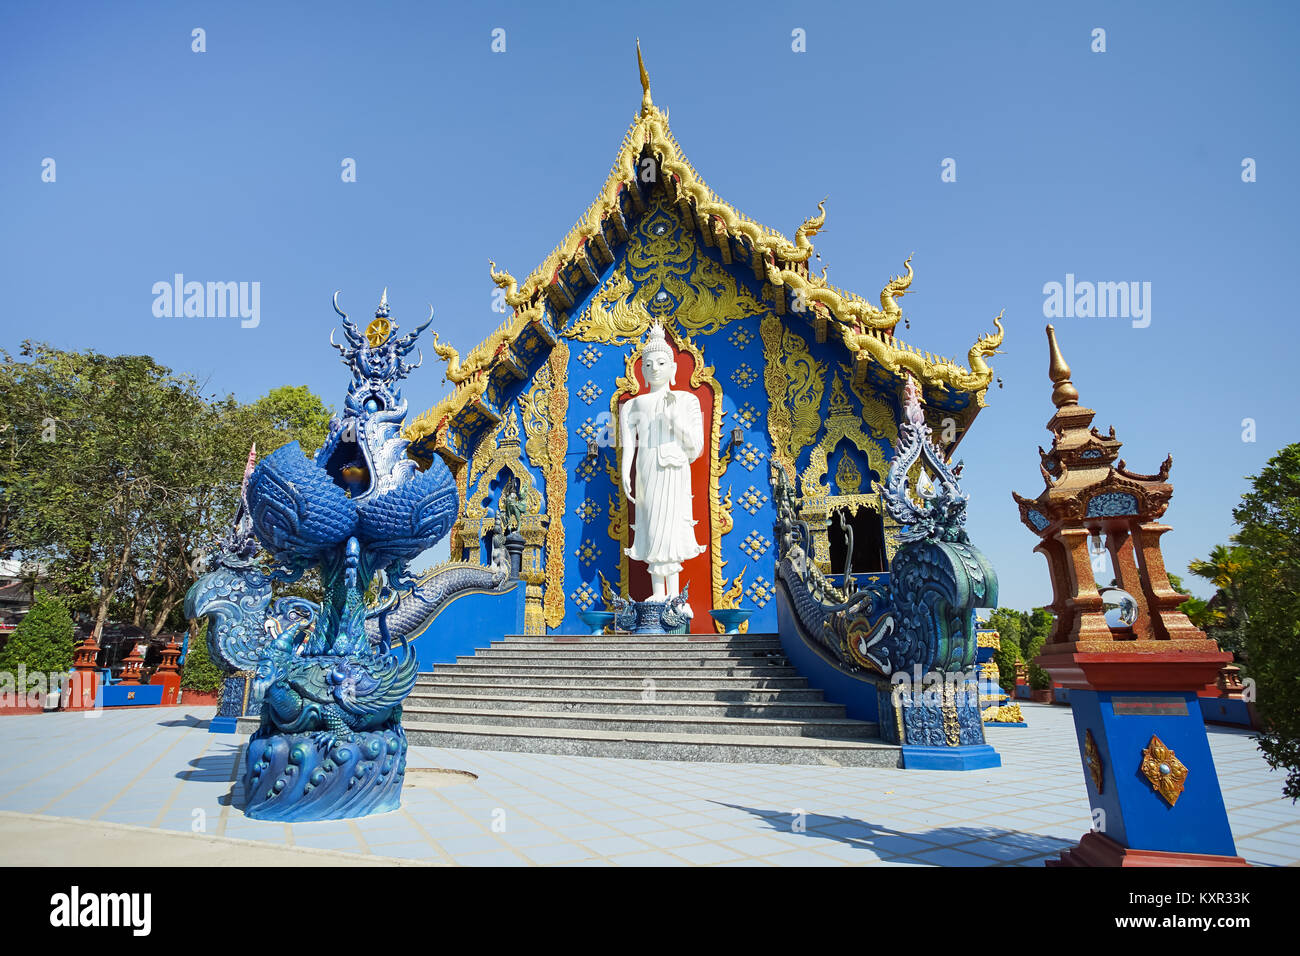 CHIANG RAI, THAILAND - December 20, 2017: Very beautiful sculpture in the Wat Rong Sua Ten or Rong Sua Ten temple. This place is the popular attractio Stock Photo